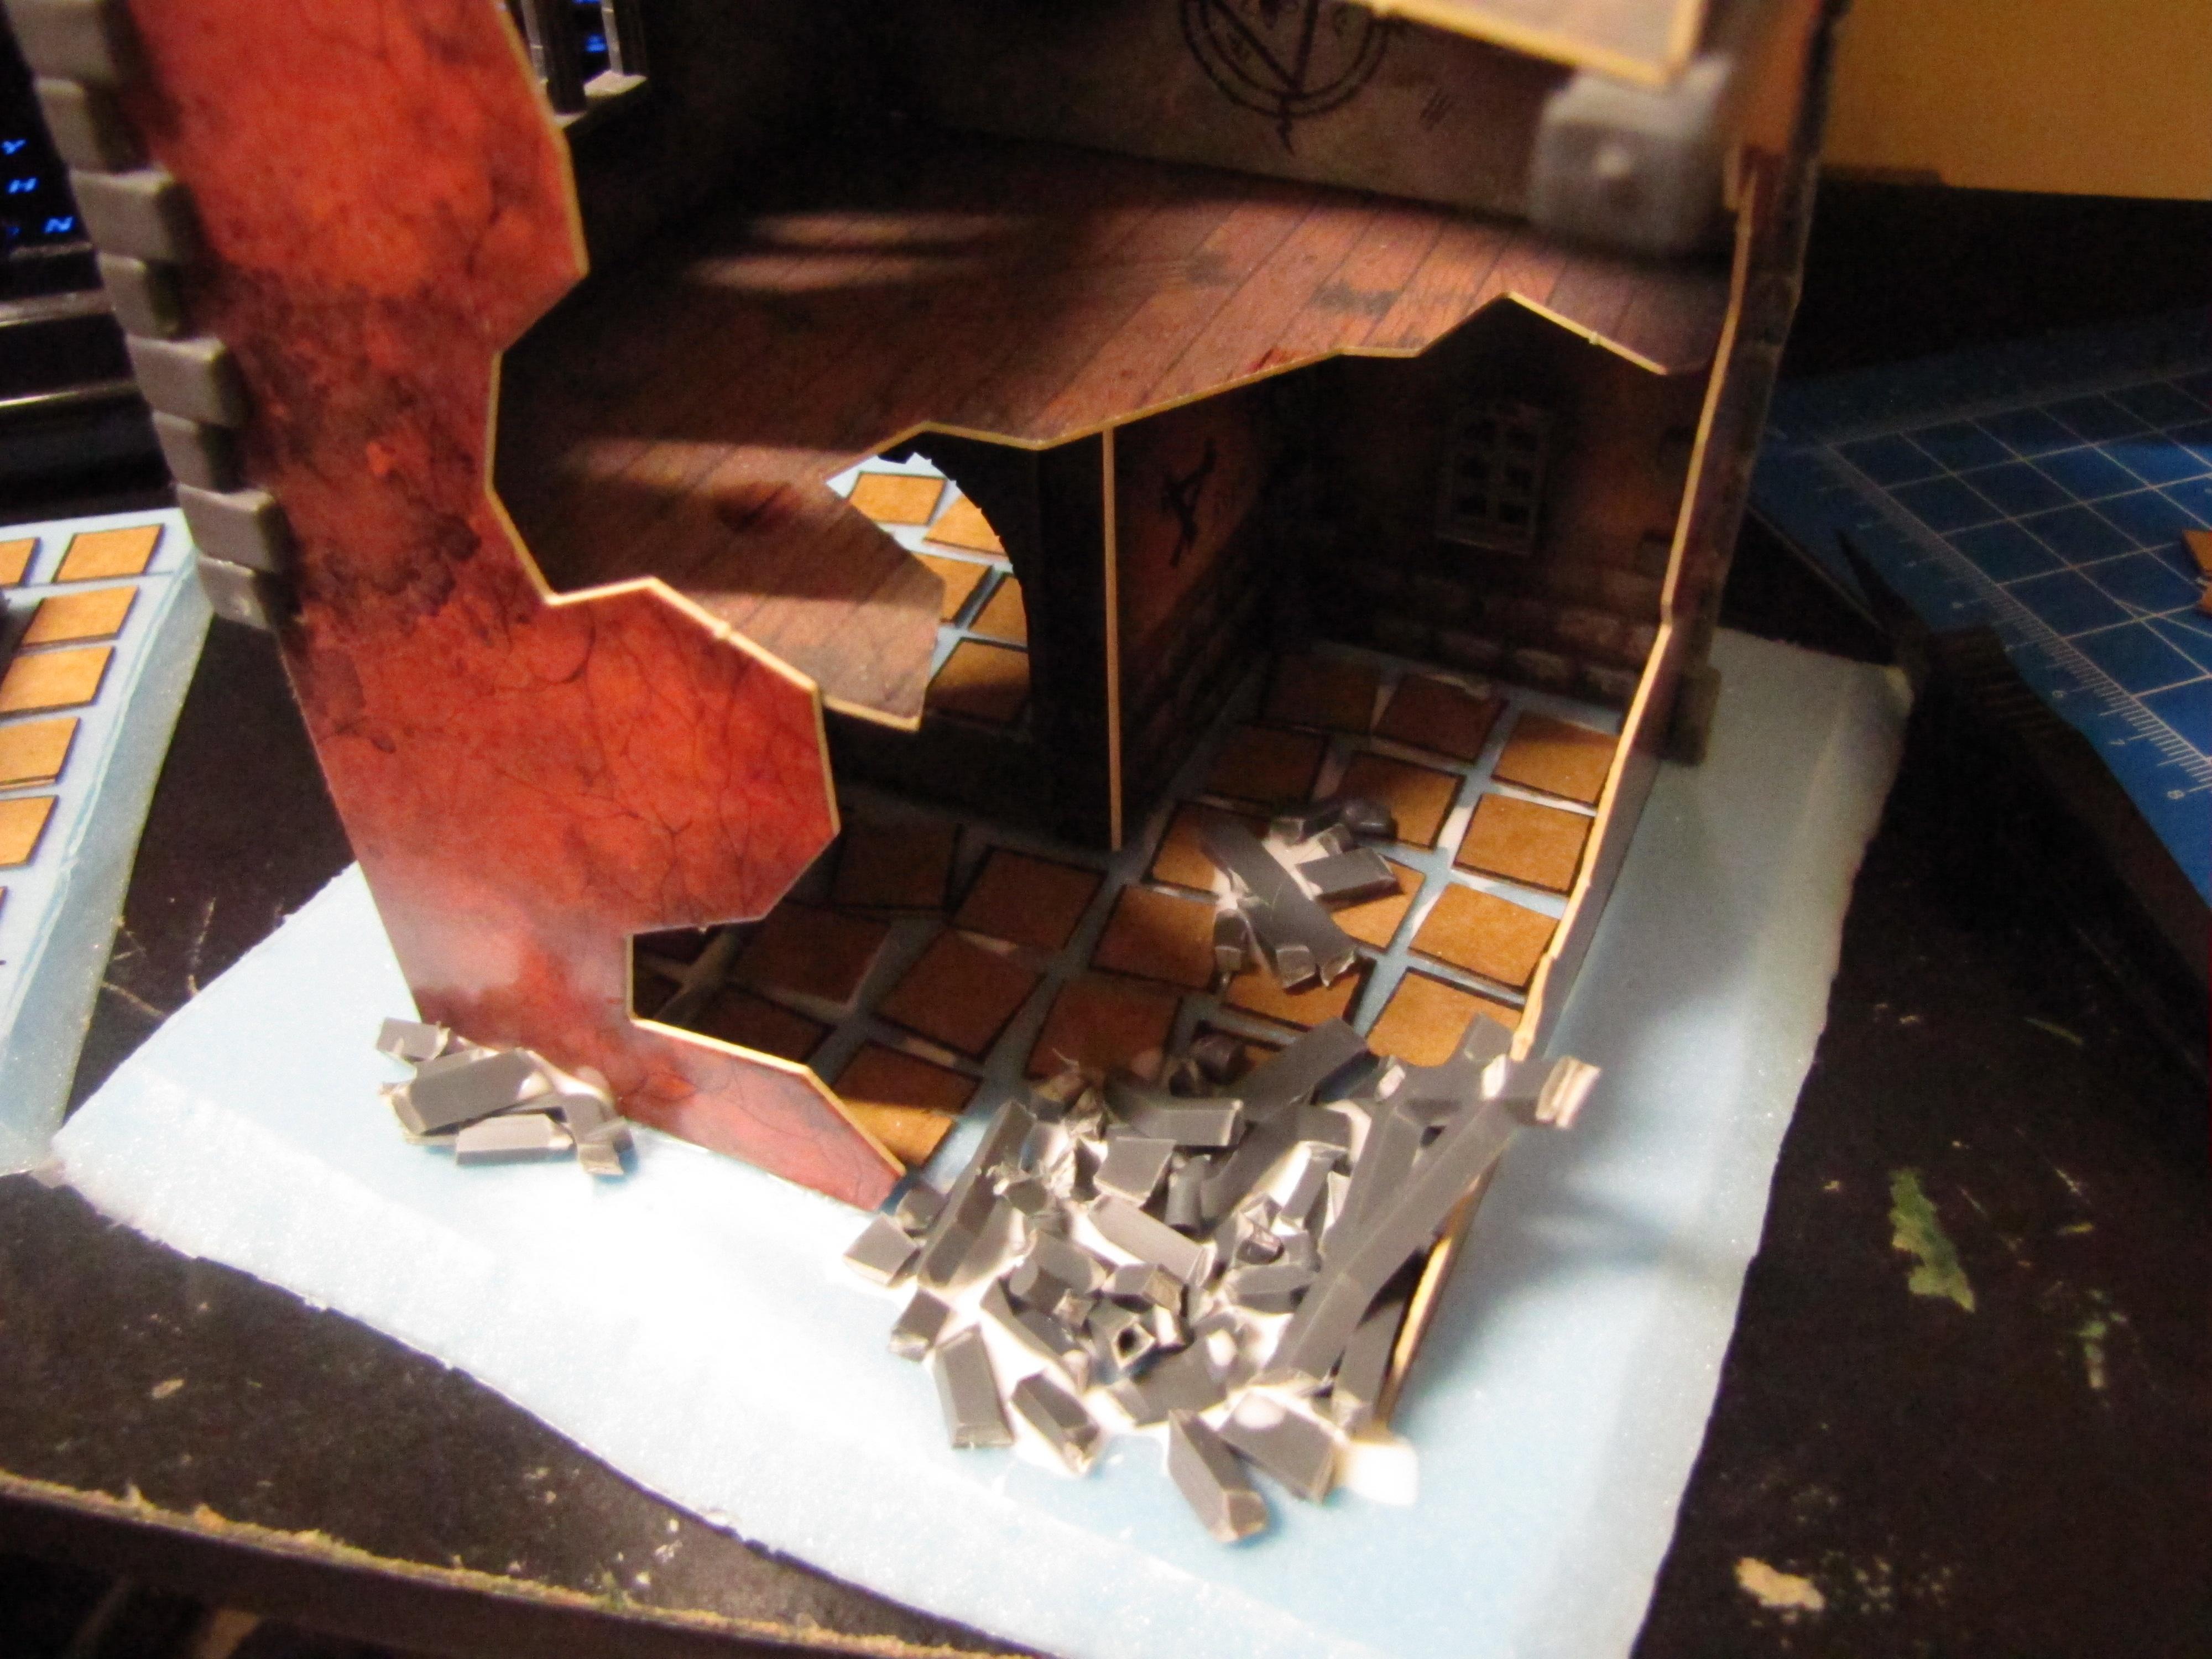 Mordheim, Terrain, tiles and sprue rubble in the tavern